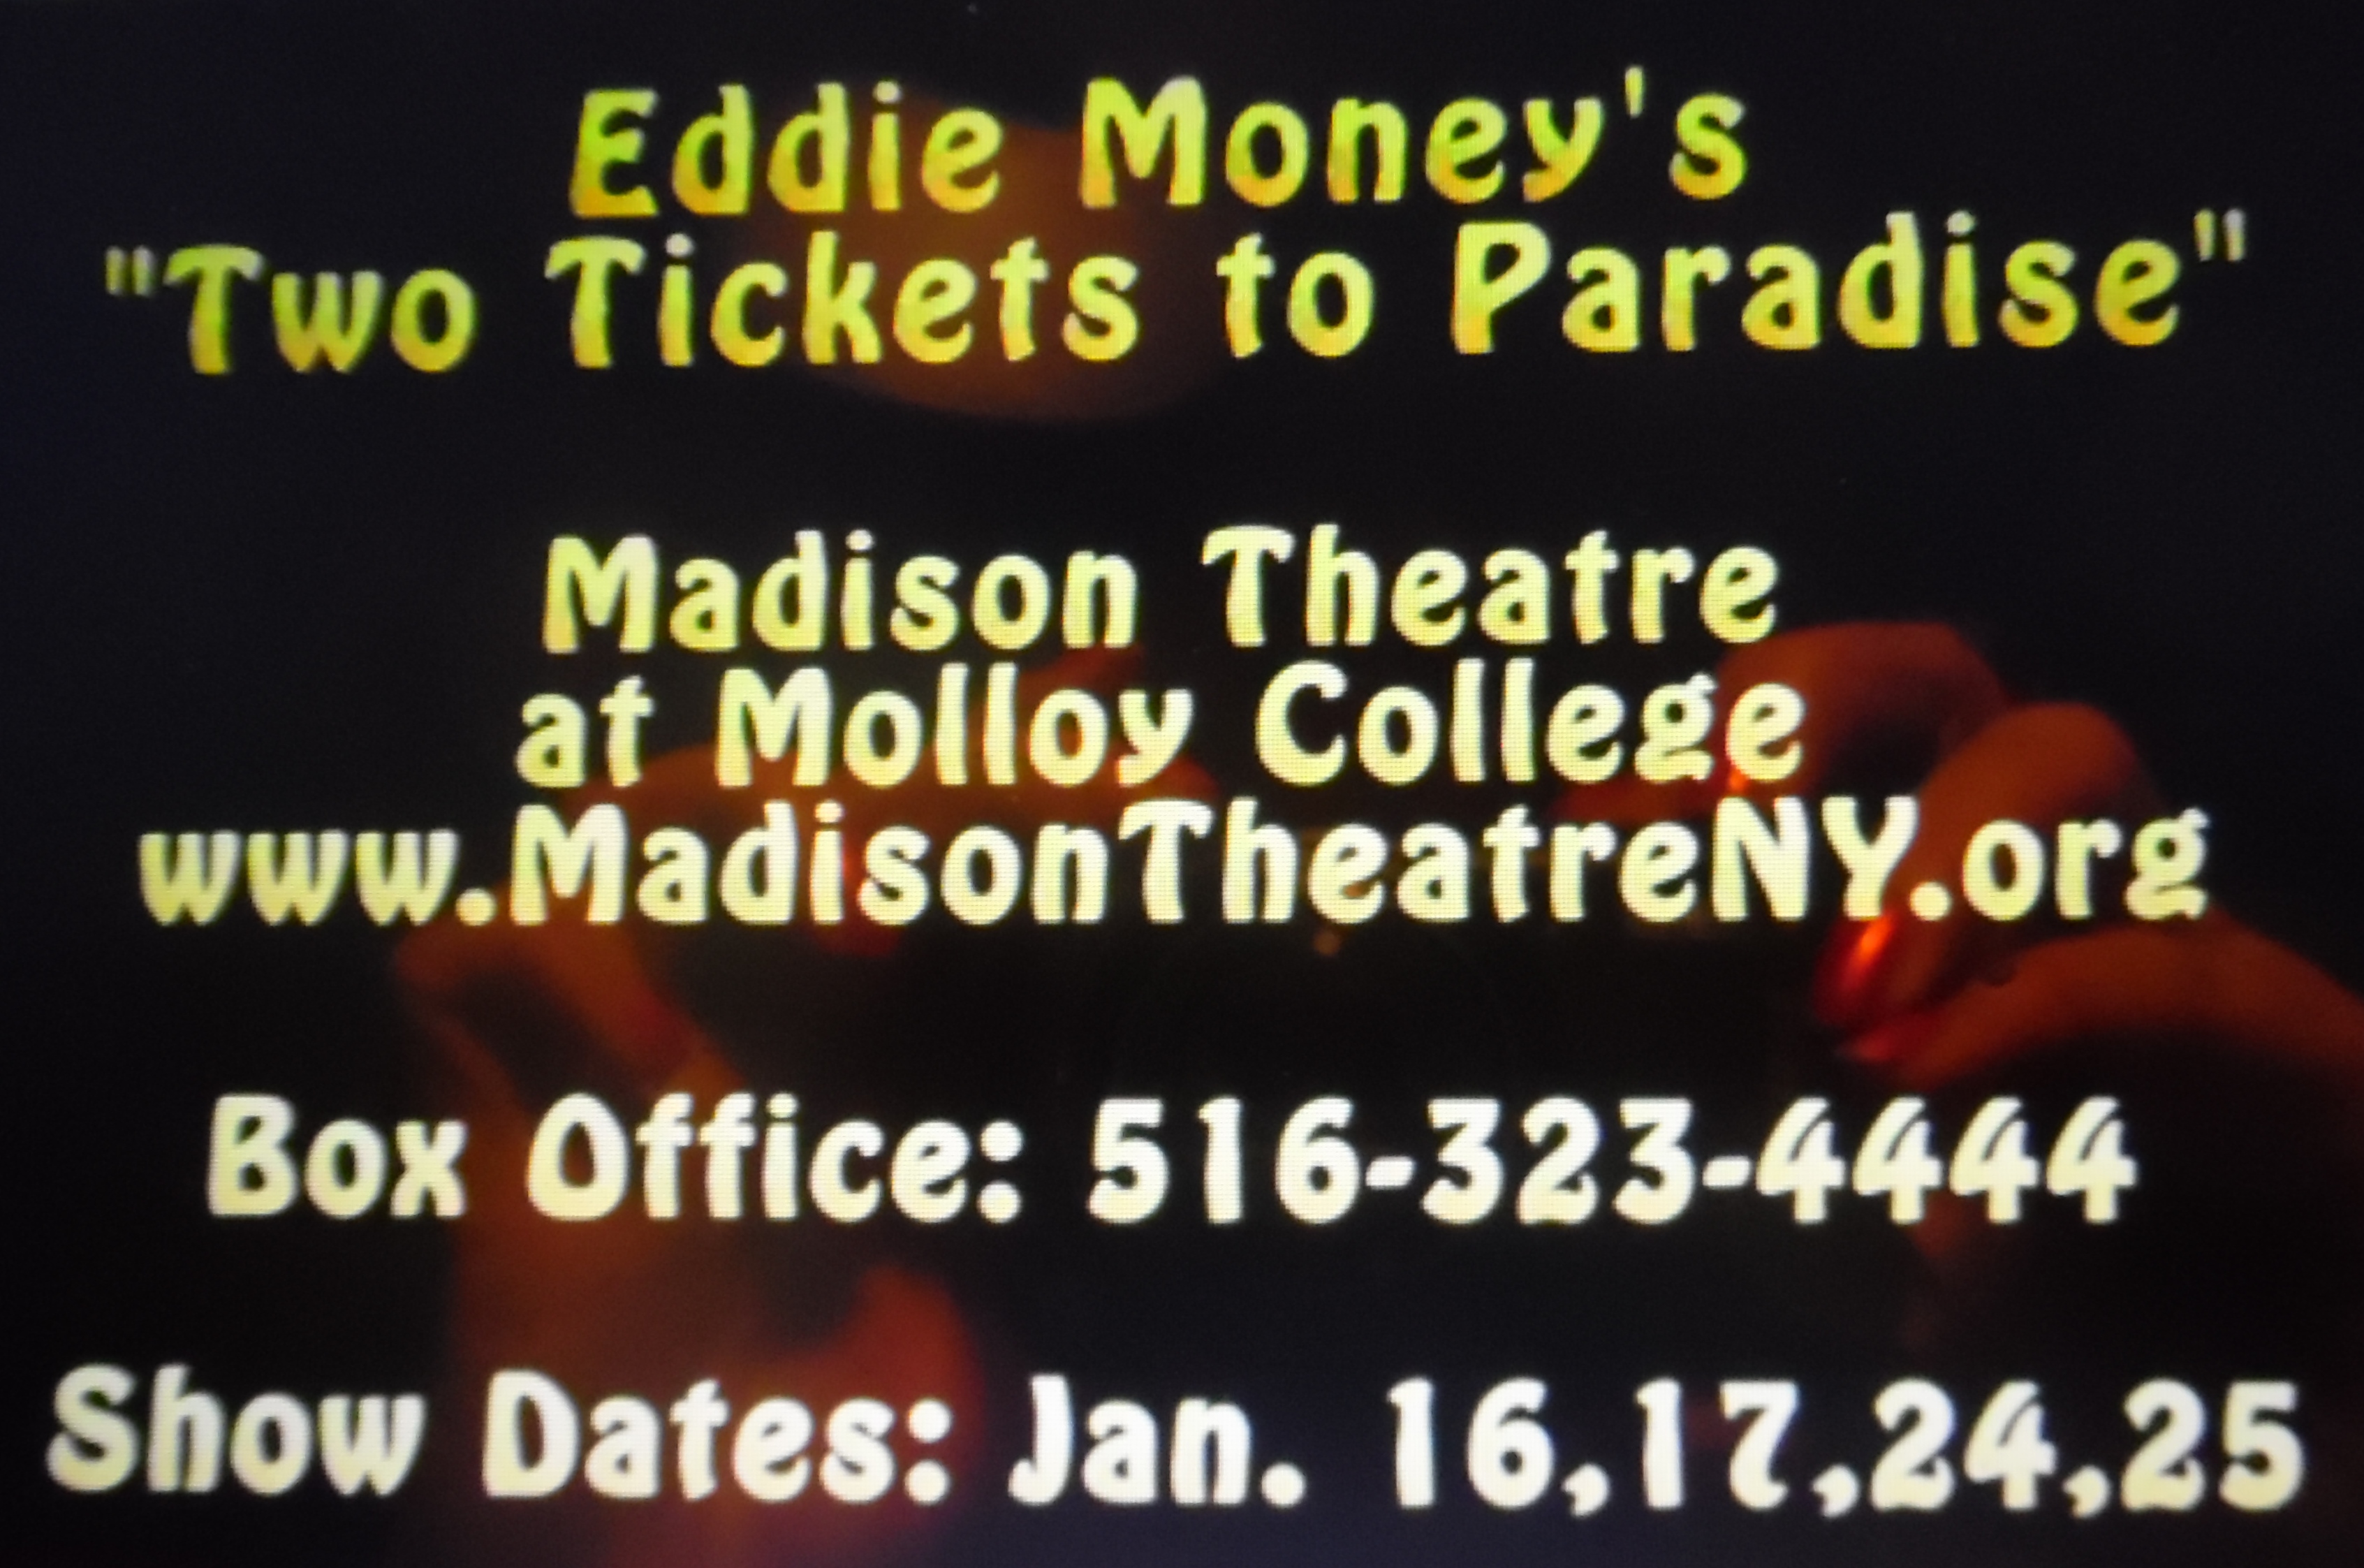 Eddie Money's autobiographical musical, Two Tickets To Paradise starring Matthew Burns as young Eddie Money. Helen Proimos as his mom, Mrs. Mahoney.